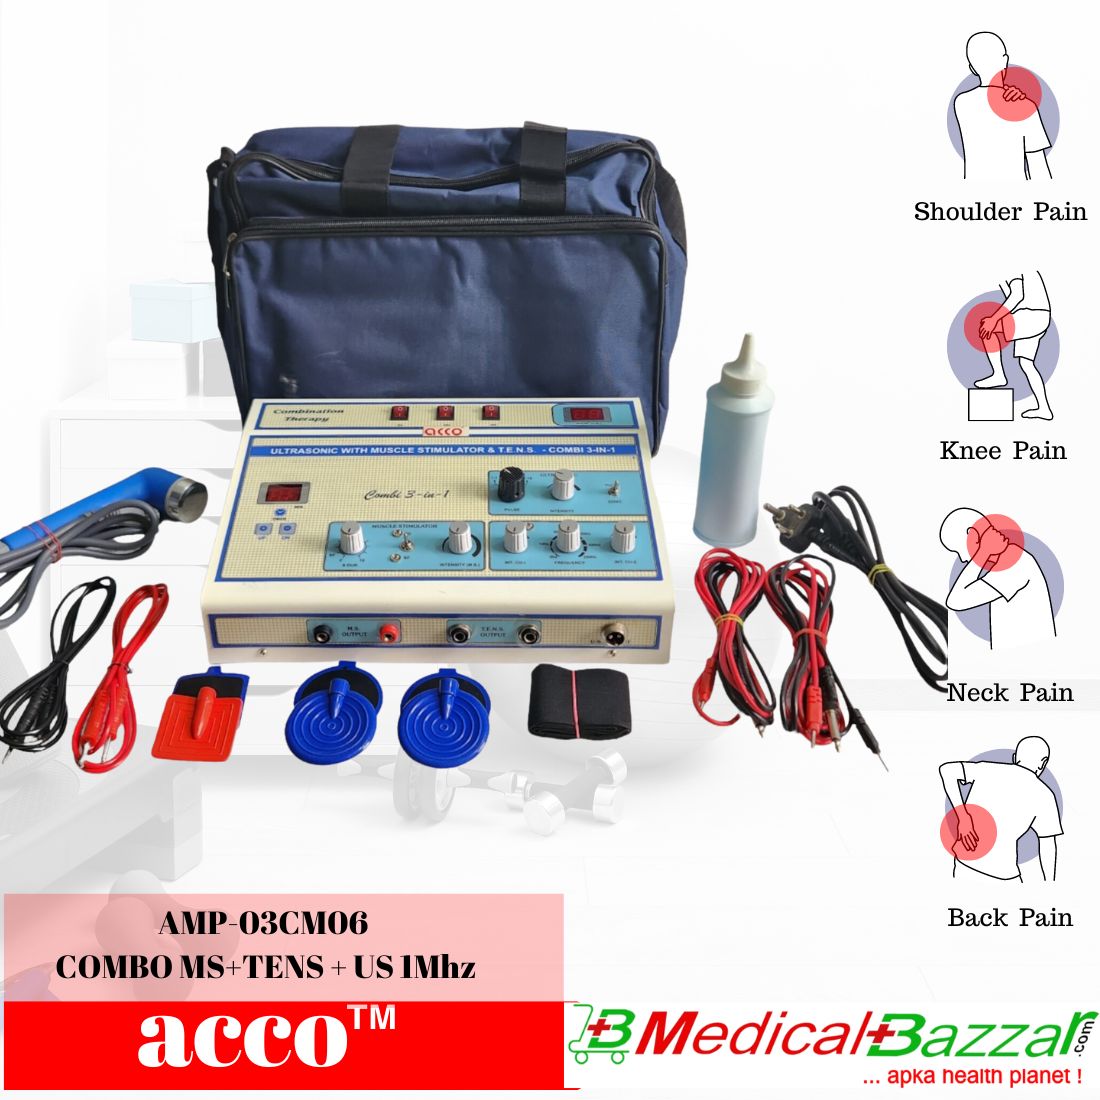 acco Combo MS Tens US for Physiotherapy